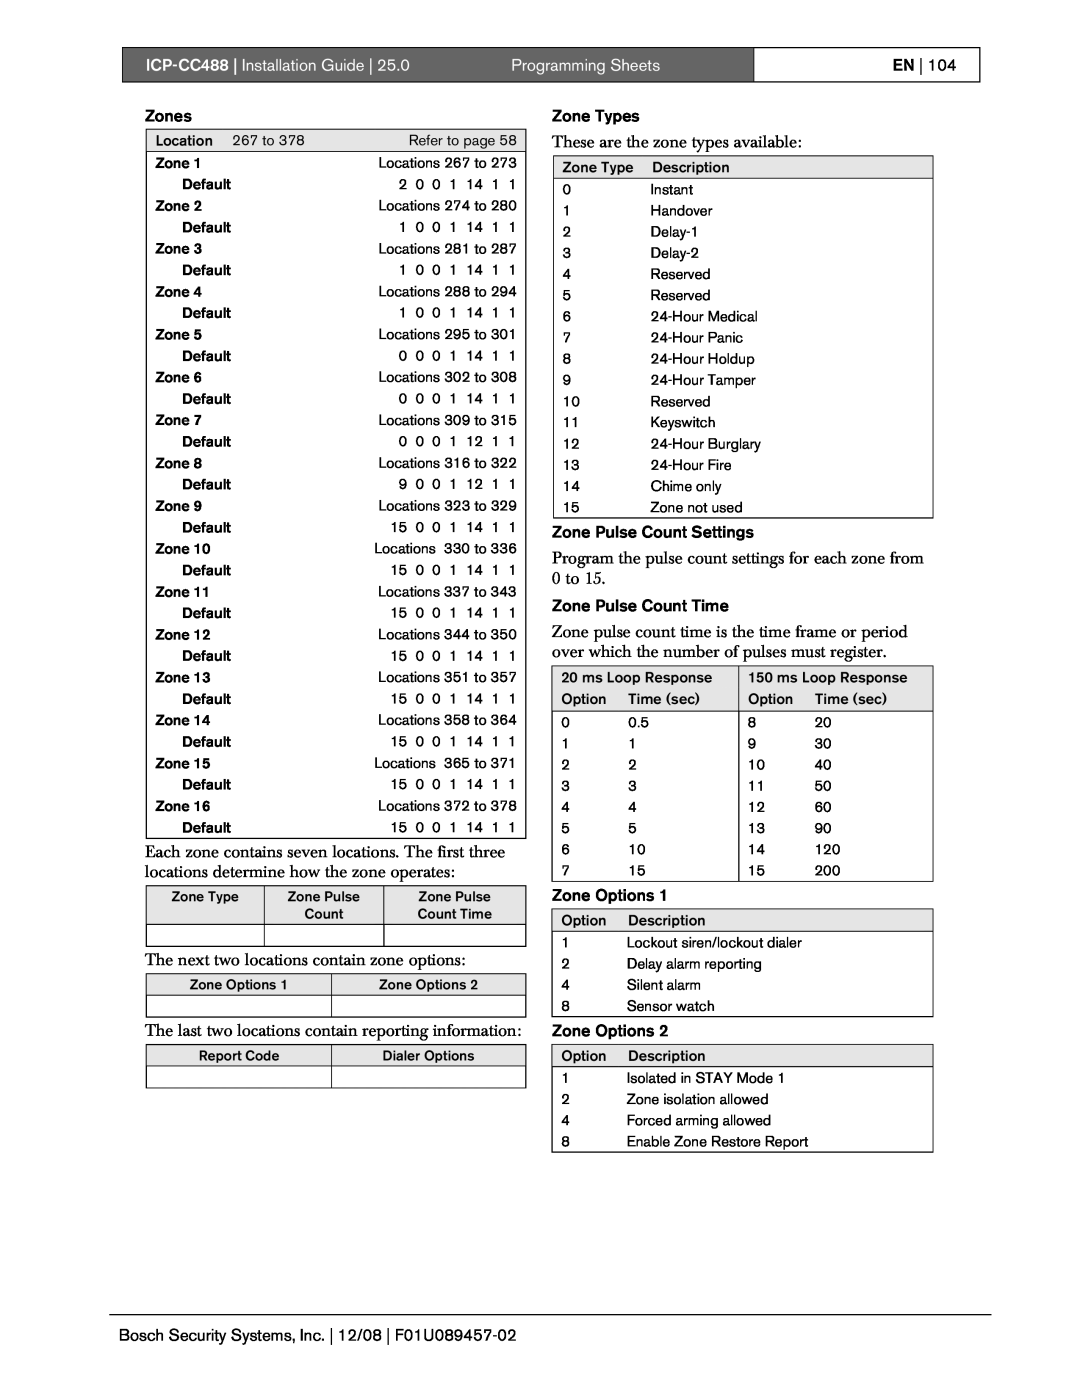 Bosch Appliances ICP-CC488| Installation Guide, Programming Sheets, En, Zones, Zone Types, Zone Pulse Count Settings 